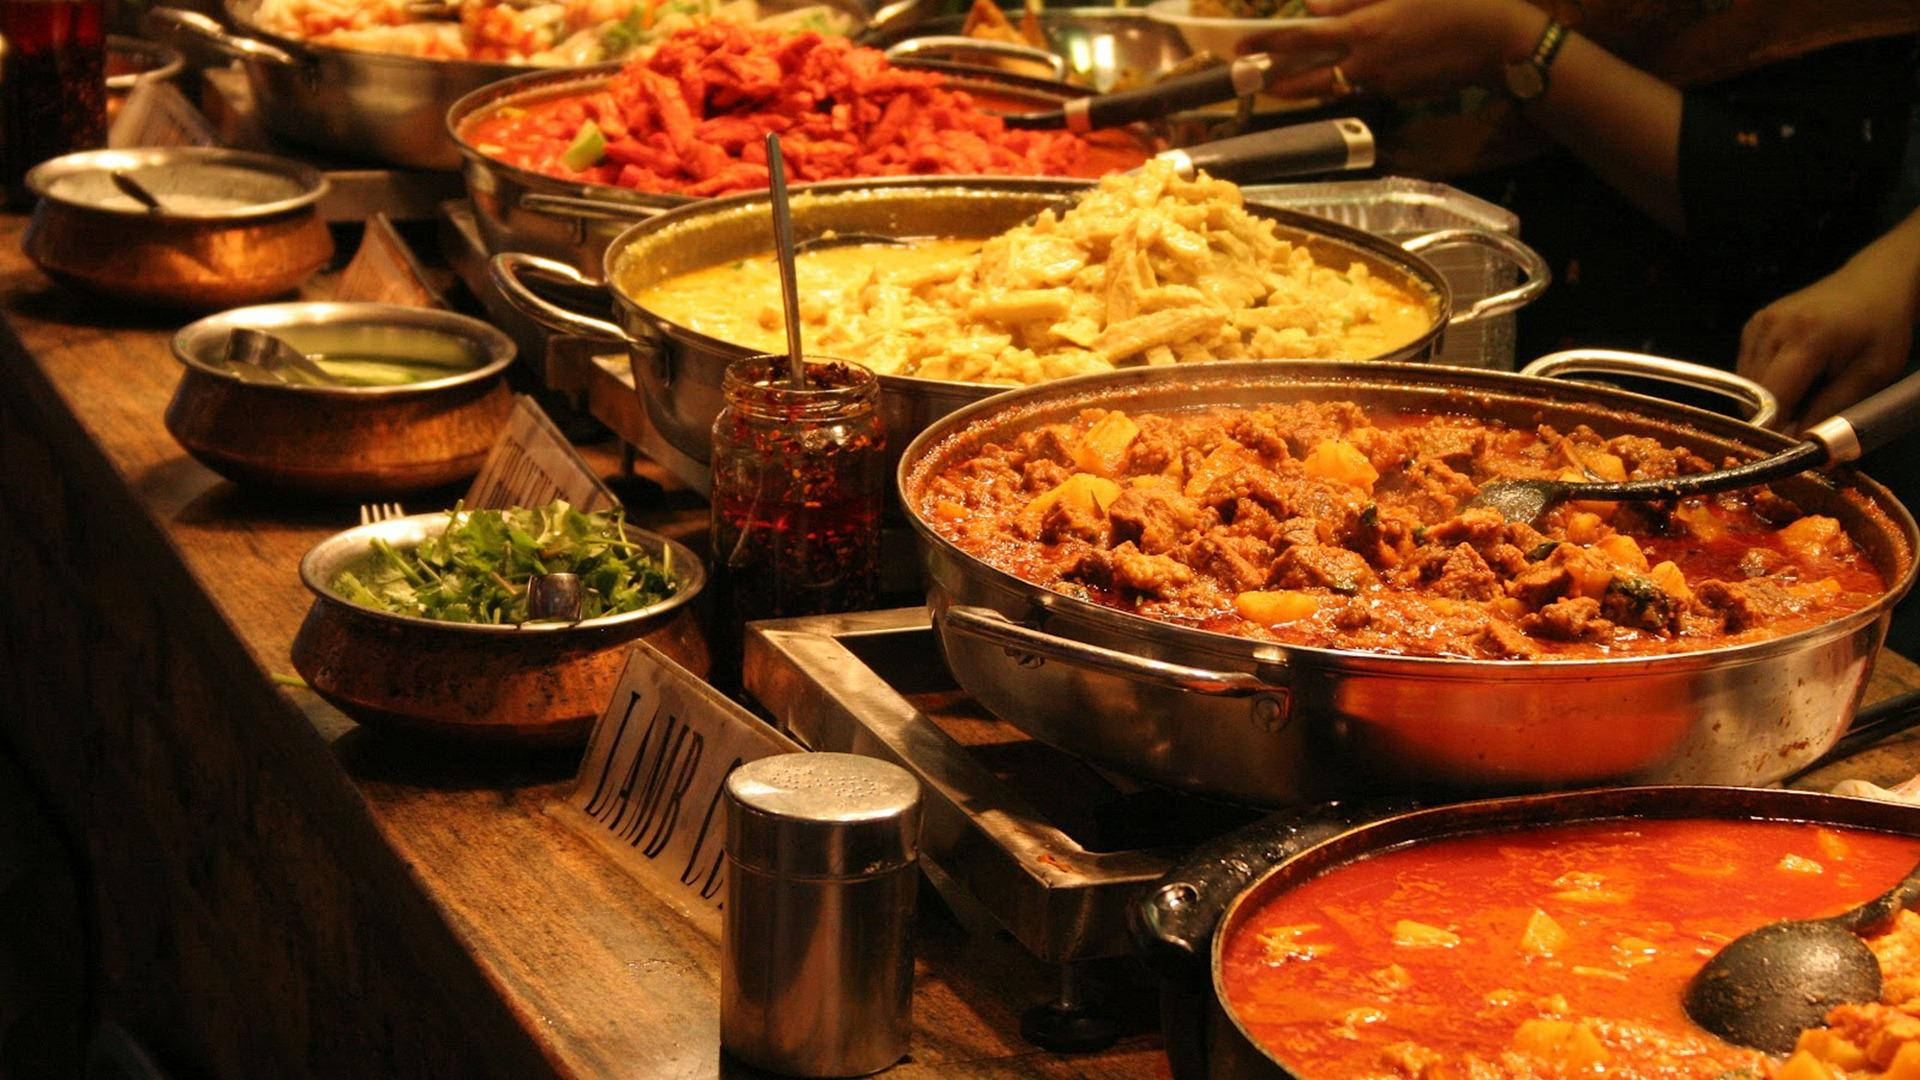 "a Colorful Spread Of Authentic Indian Cuisine" Wallpaper